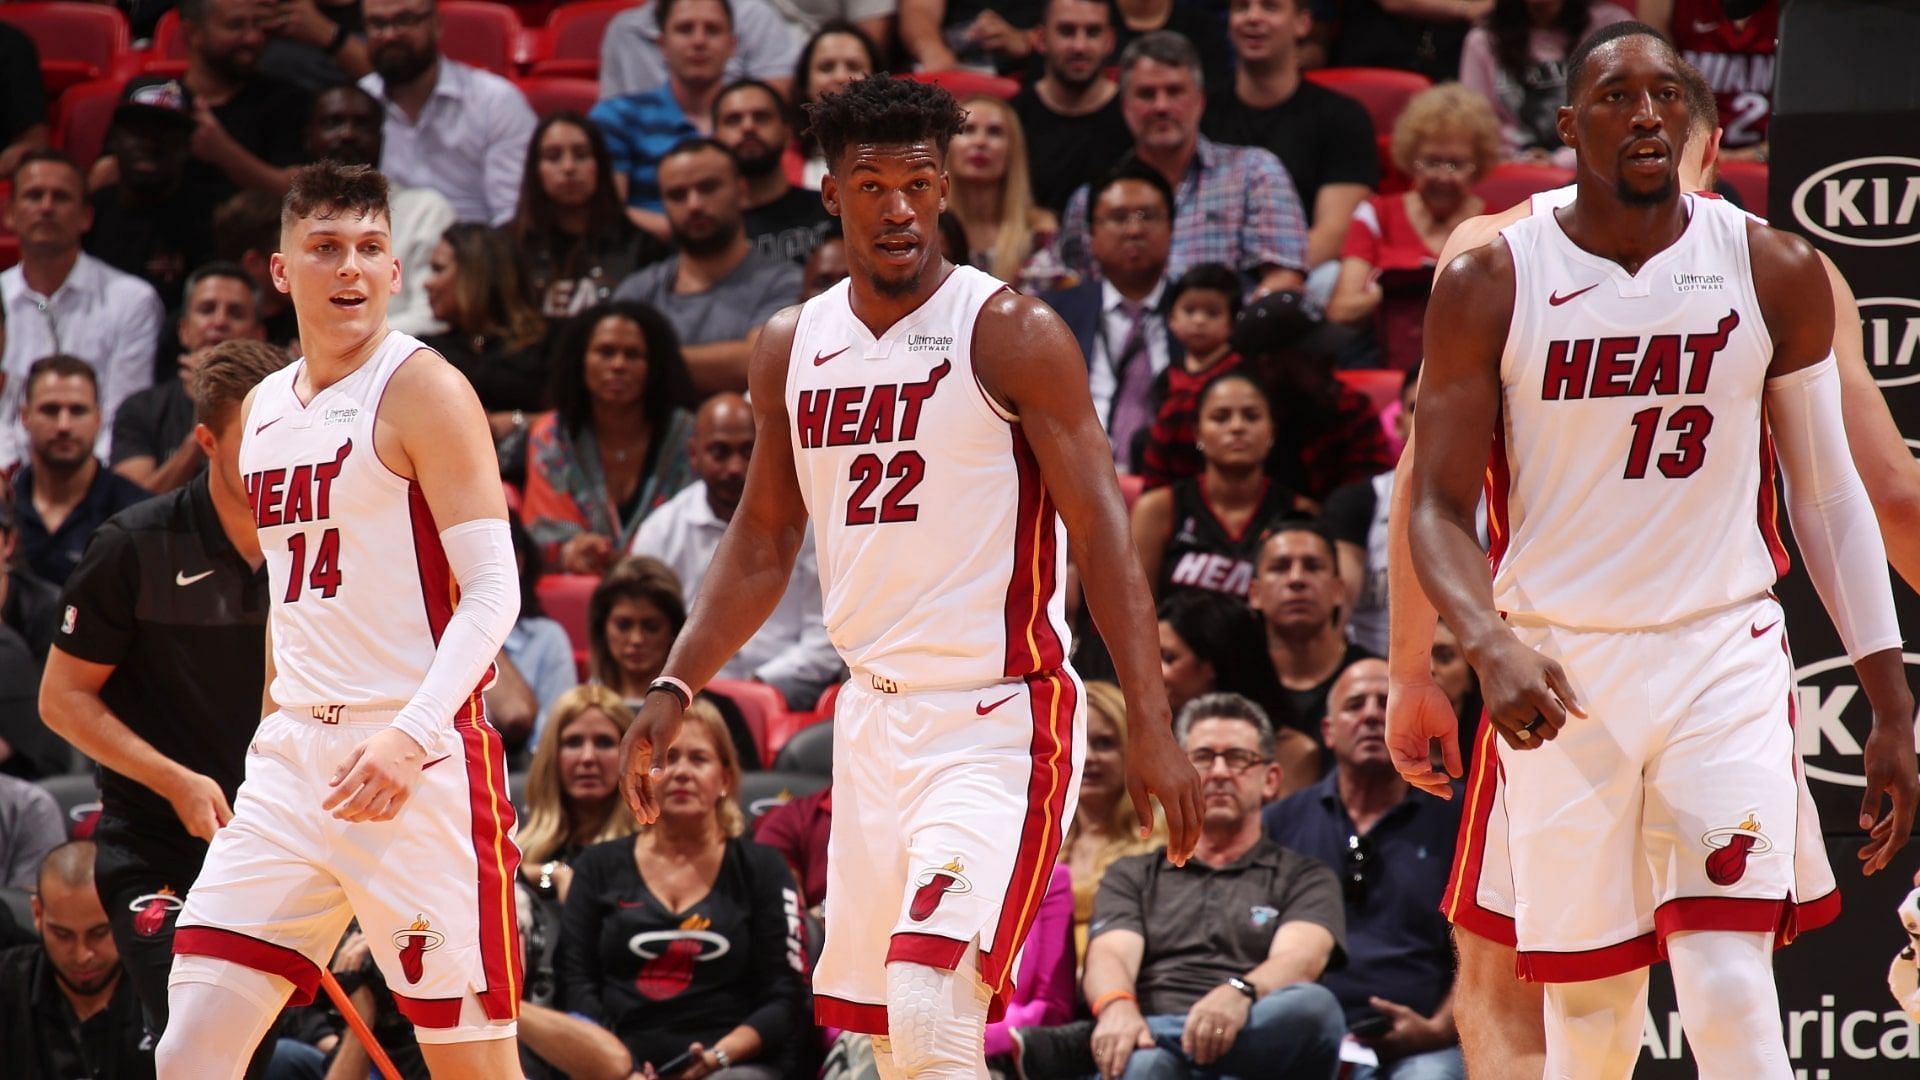 In addition to Jimmy Butle and Bam Adebayo, Tyler Herro could also miss the game between the Miami Heat and Philadelphia 76ers. [Photo: Heat Nation]